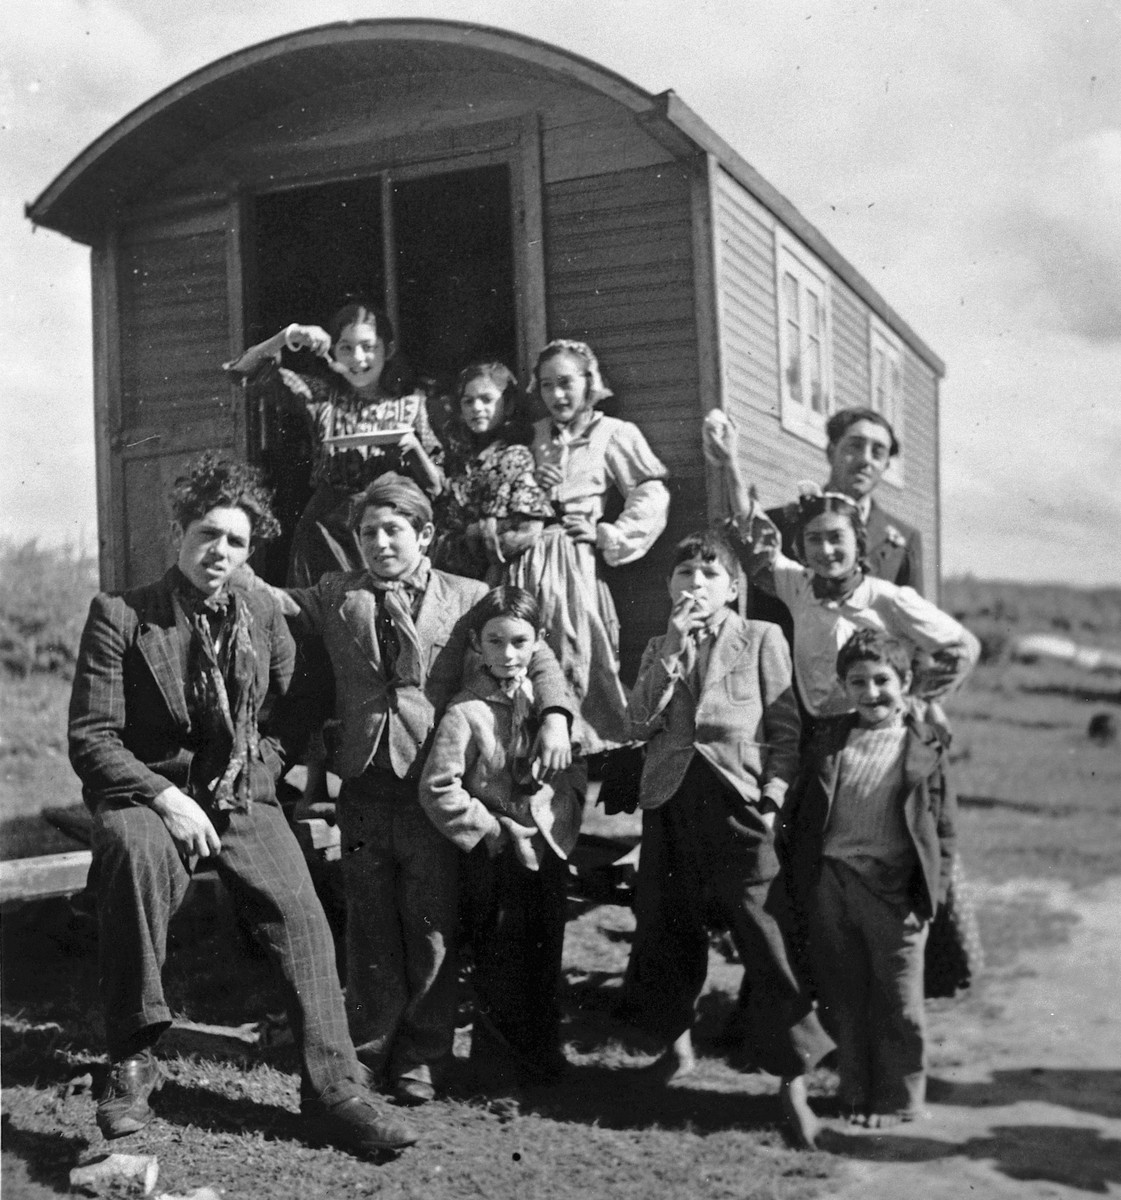 Romani children and youth pose around the entrance to a caravan.

The caption in "The Historic Present" reads, "Europe, 1930s."